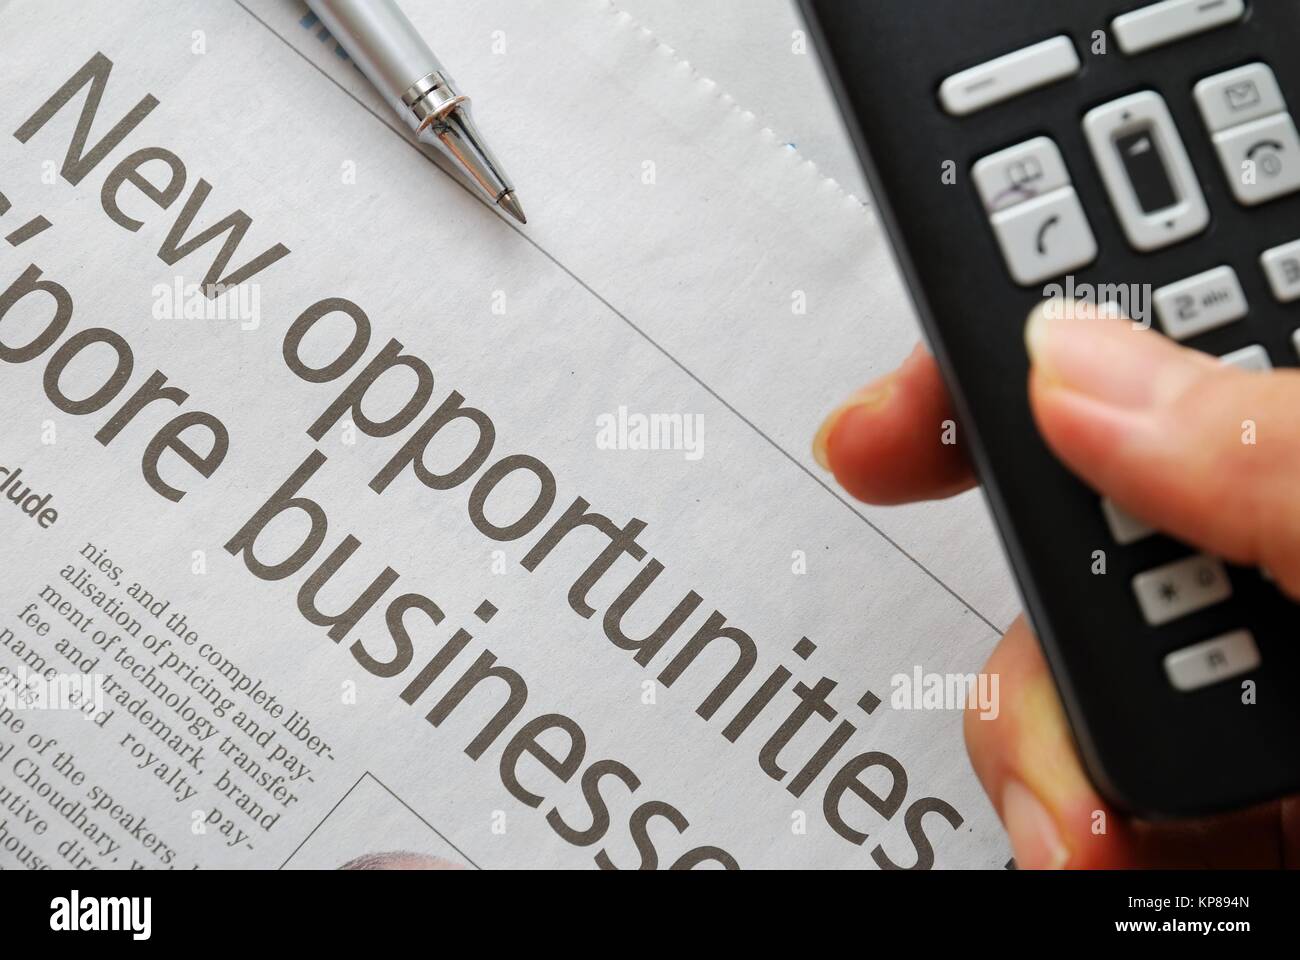 Closeup of new opportunities text on newspaper with hand dialing phone in foreground, signifying business and success, office life and job searching c Stock Photo